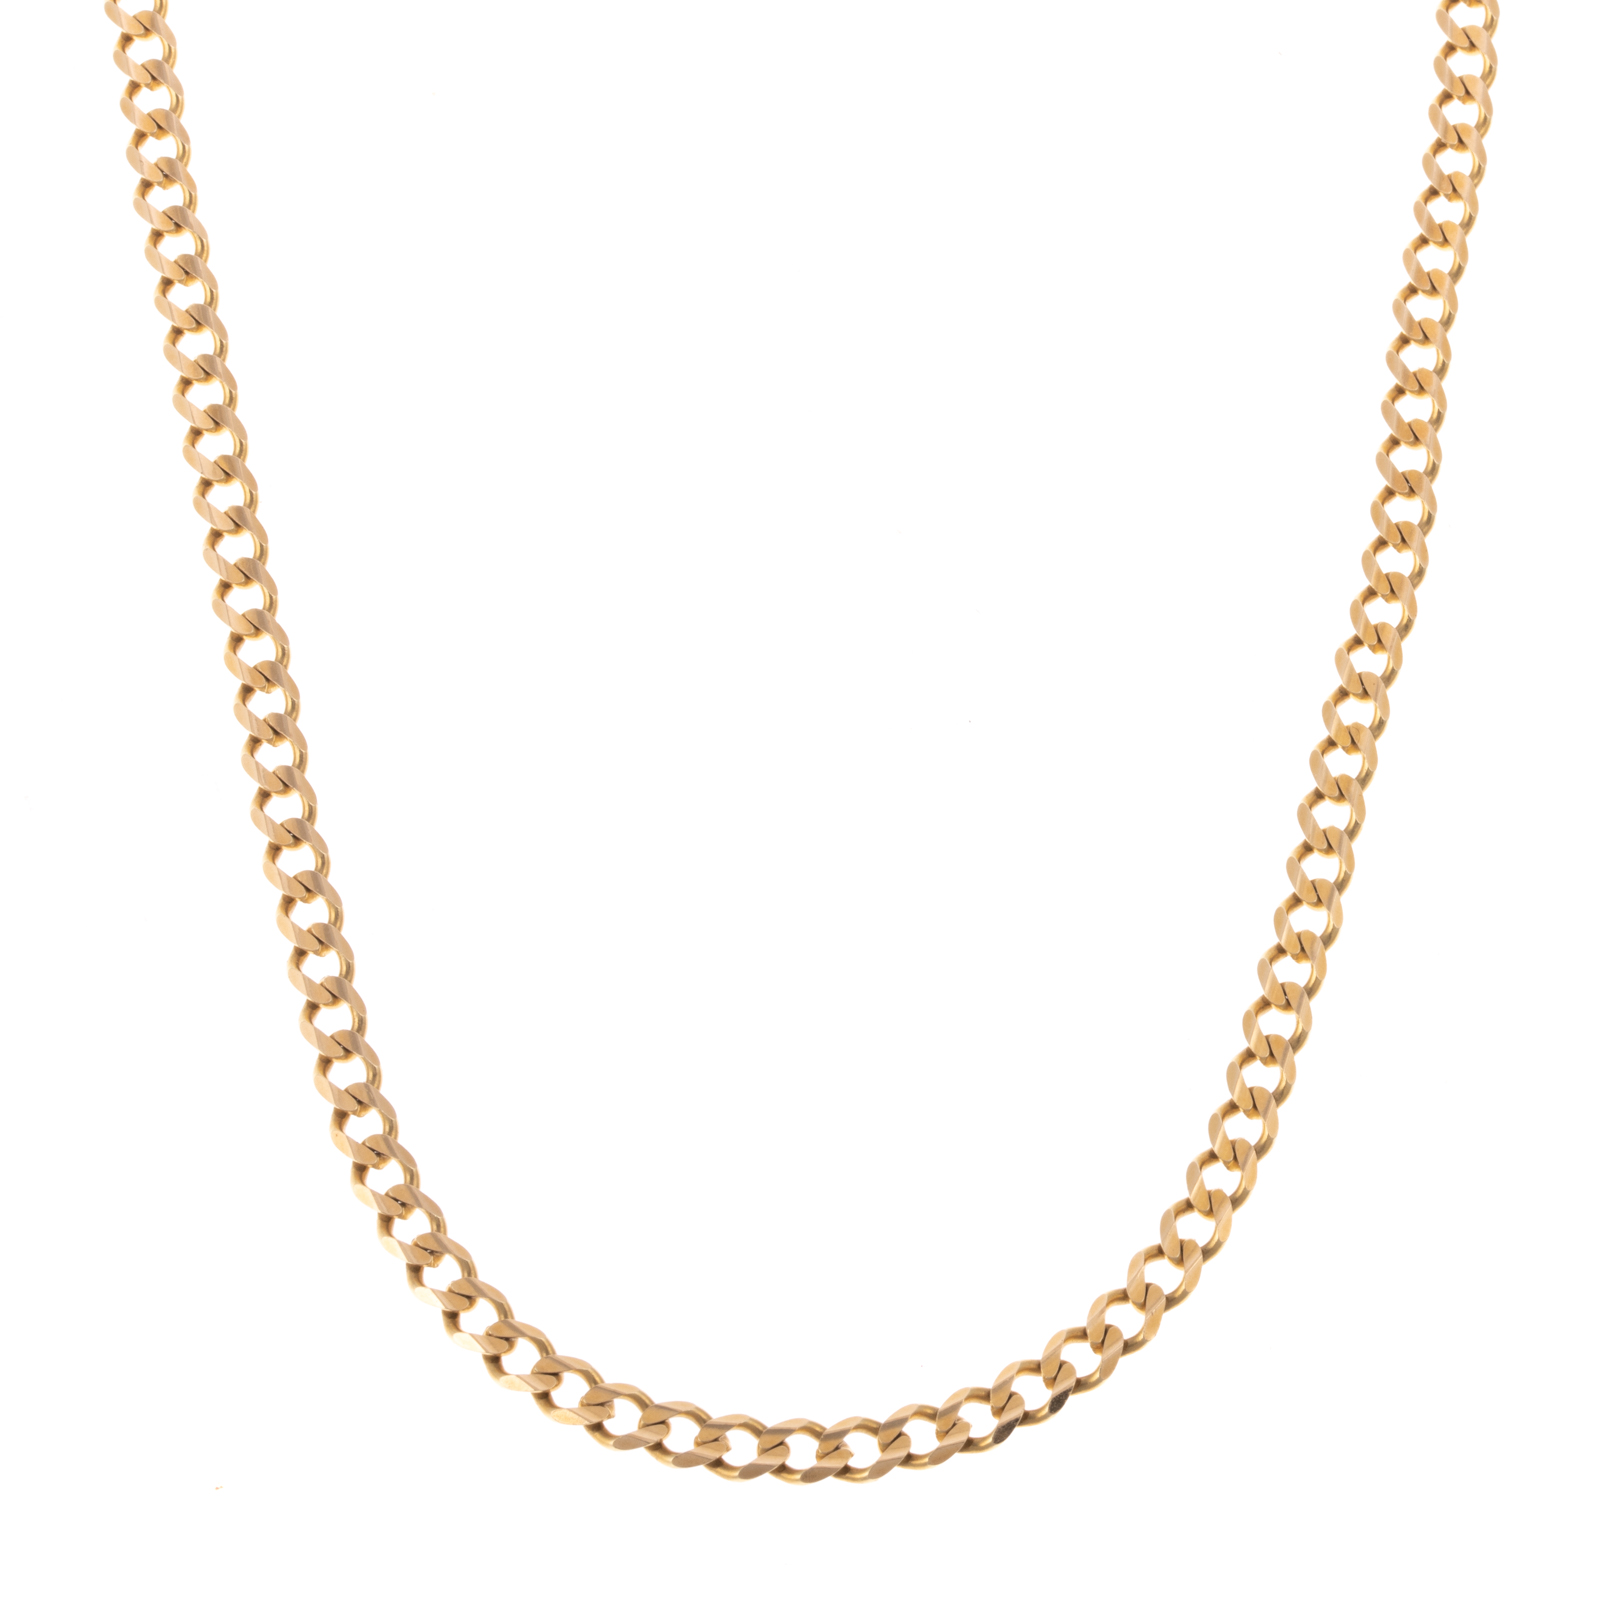 A HEAVY CURB LINK NECKLACE IN 14K 287b36